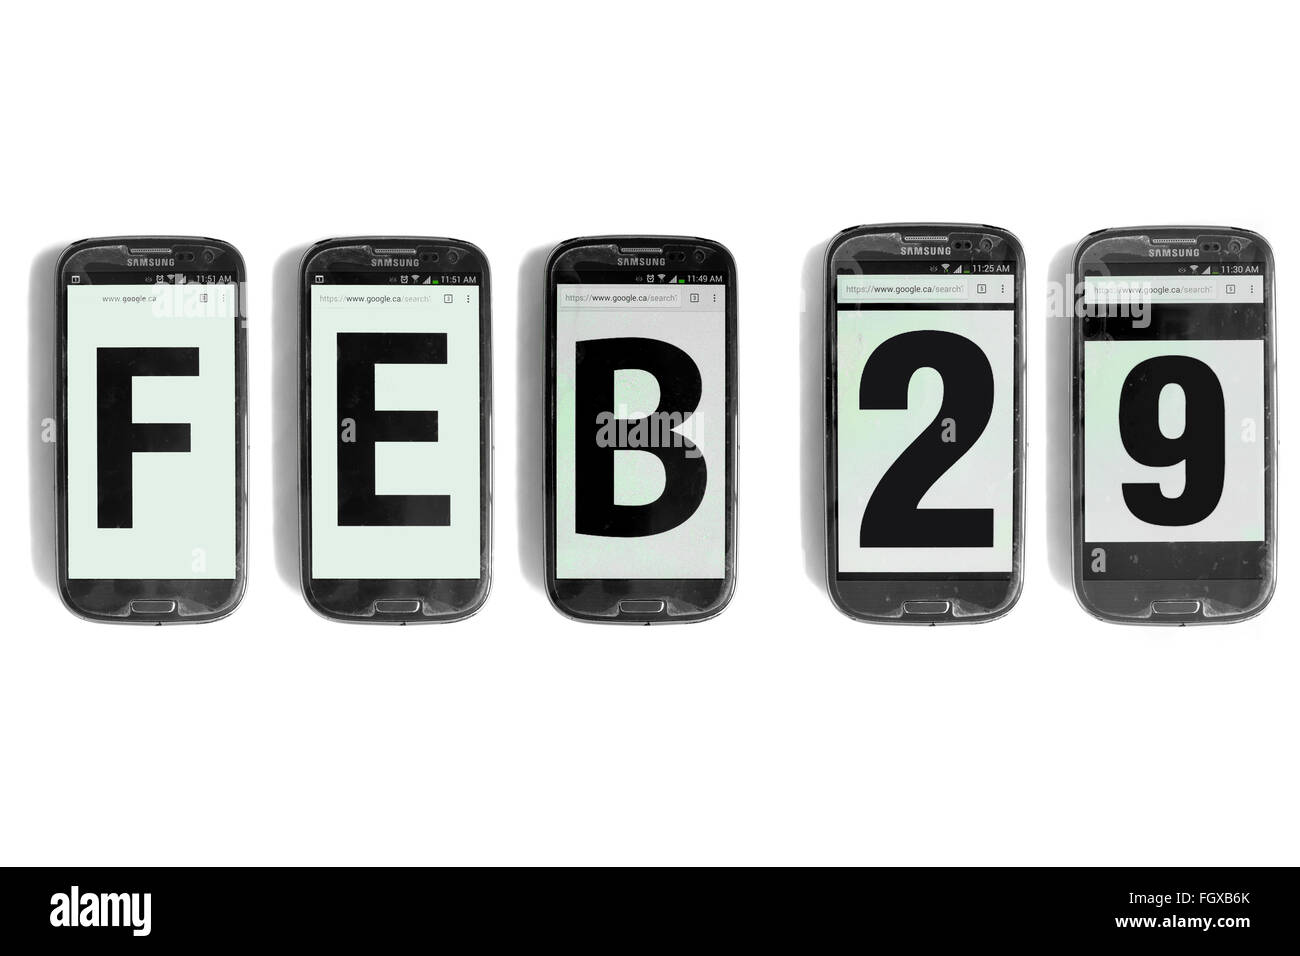 Feb 29 written on the screens of smartphones photographed against a white background. Stock Photo